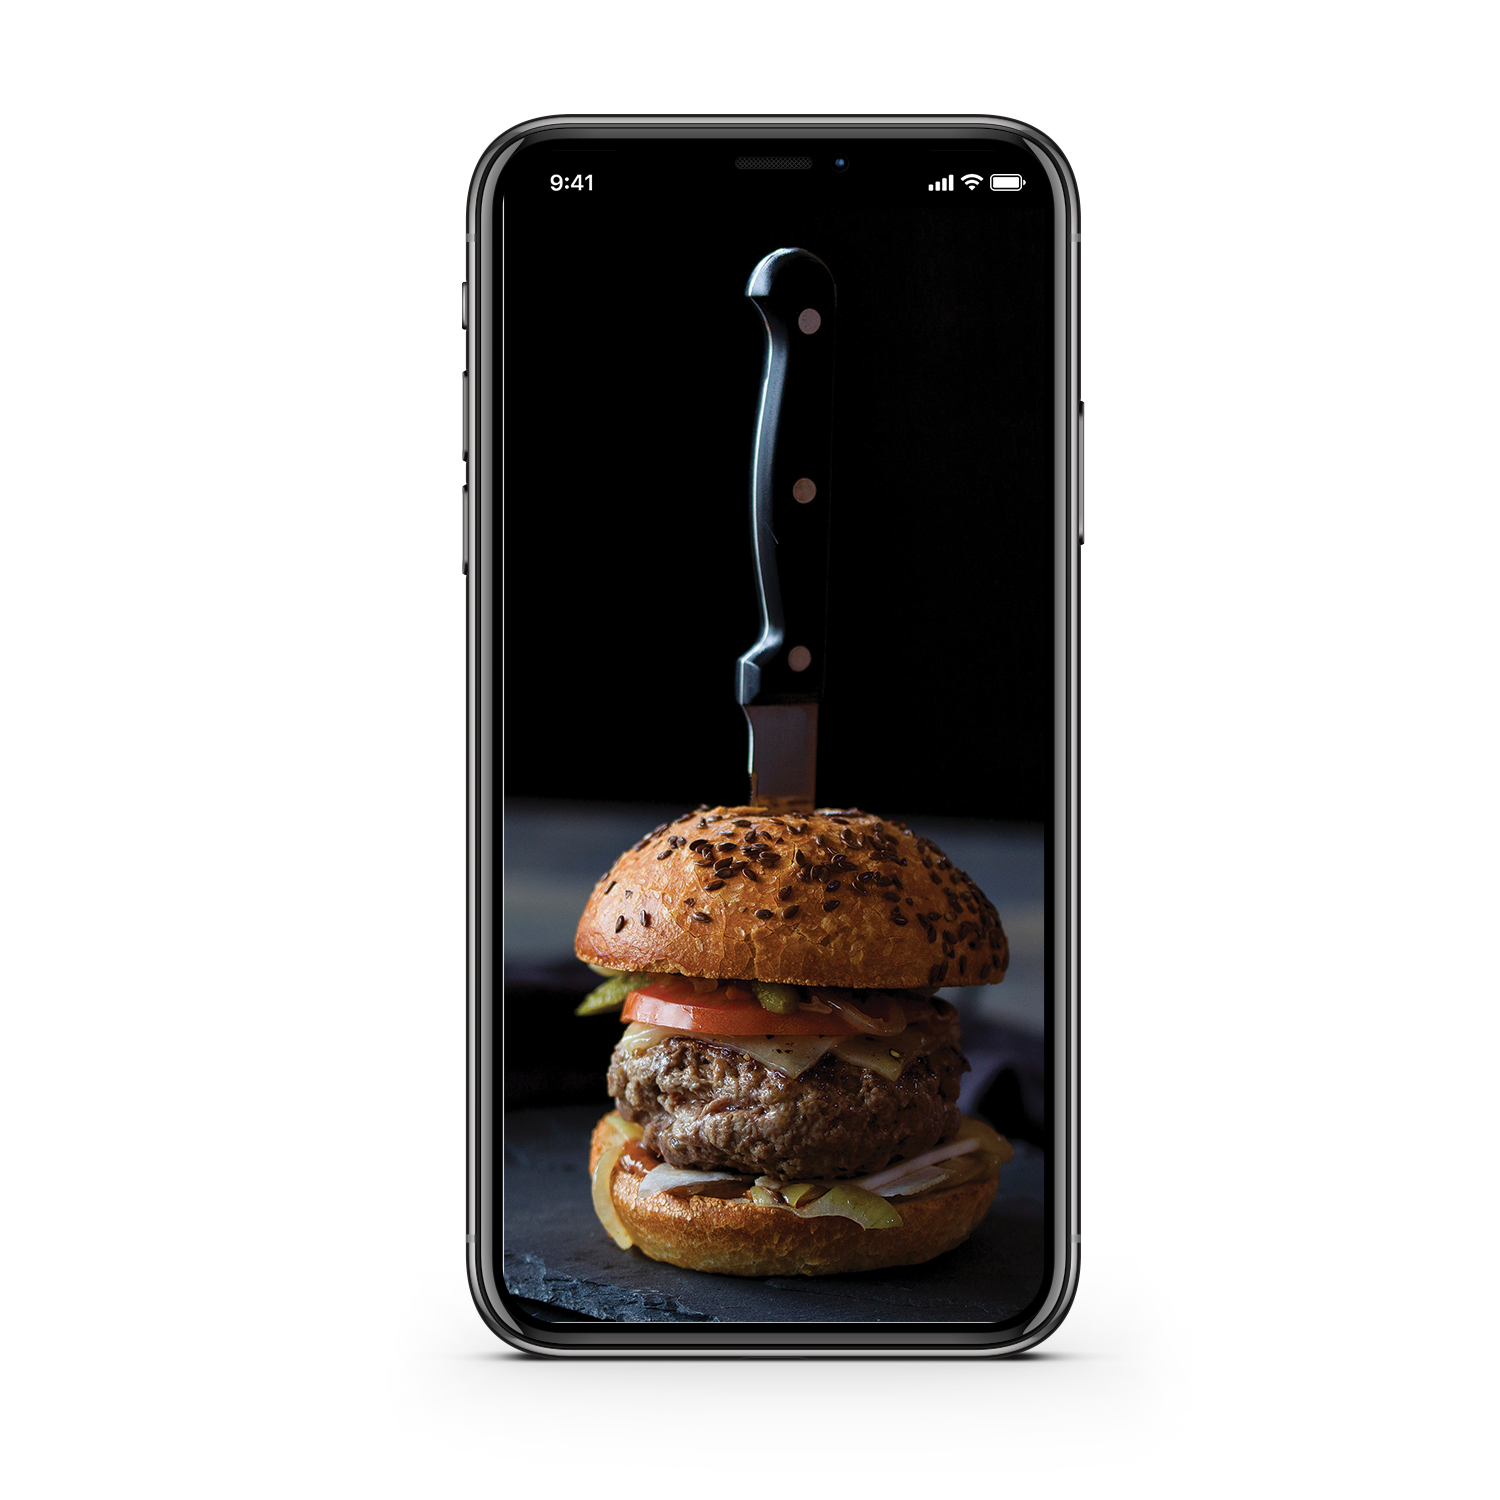 instal the new version for iphoneGodlike Burger